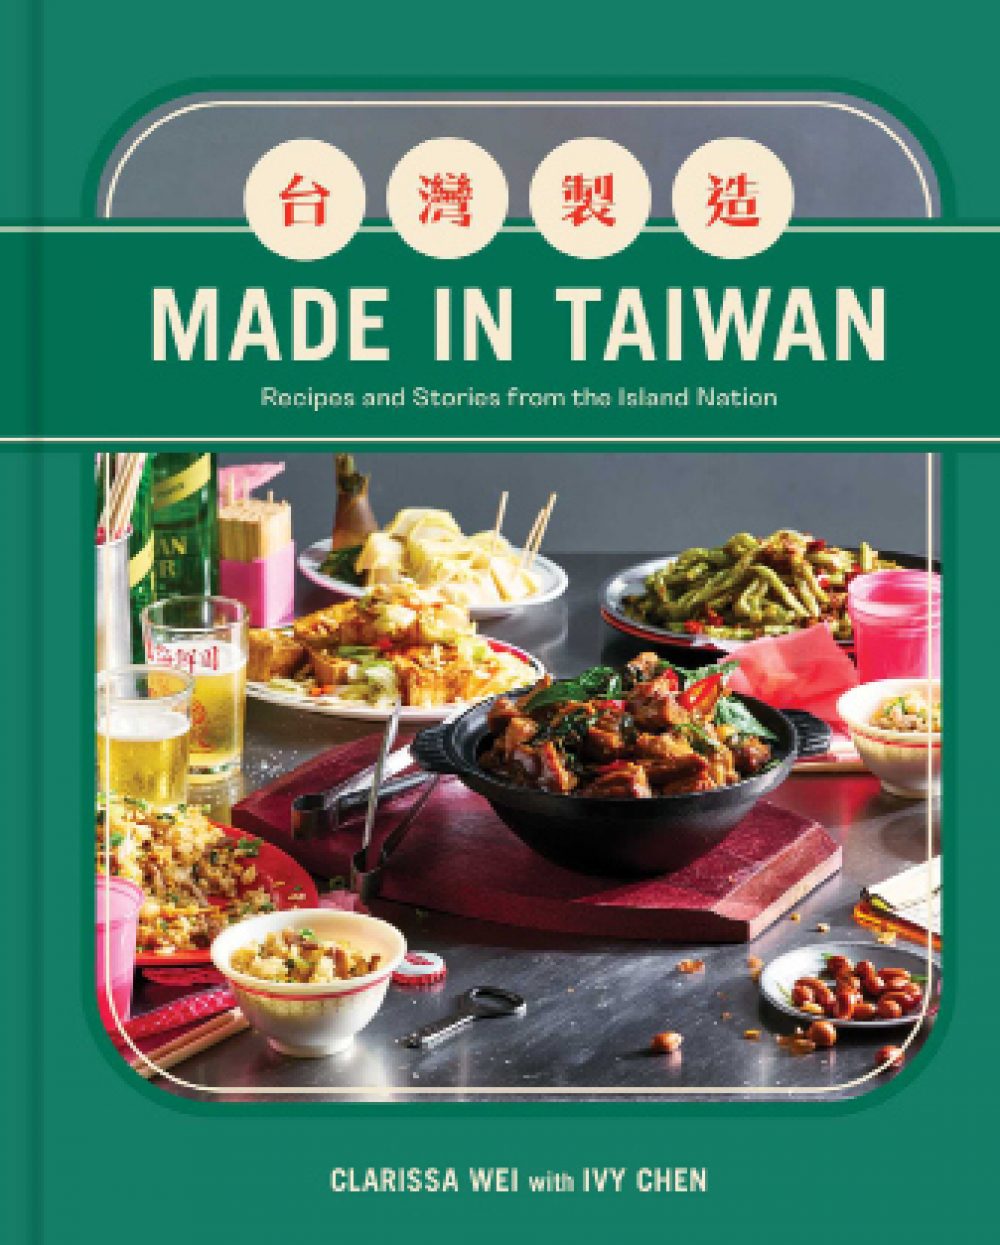 Book Review i41 Made in Taiwan